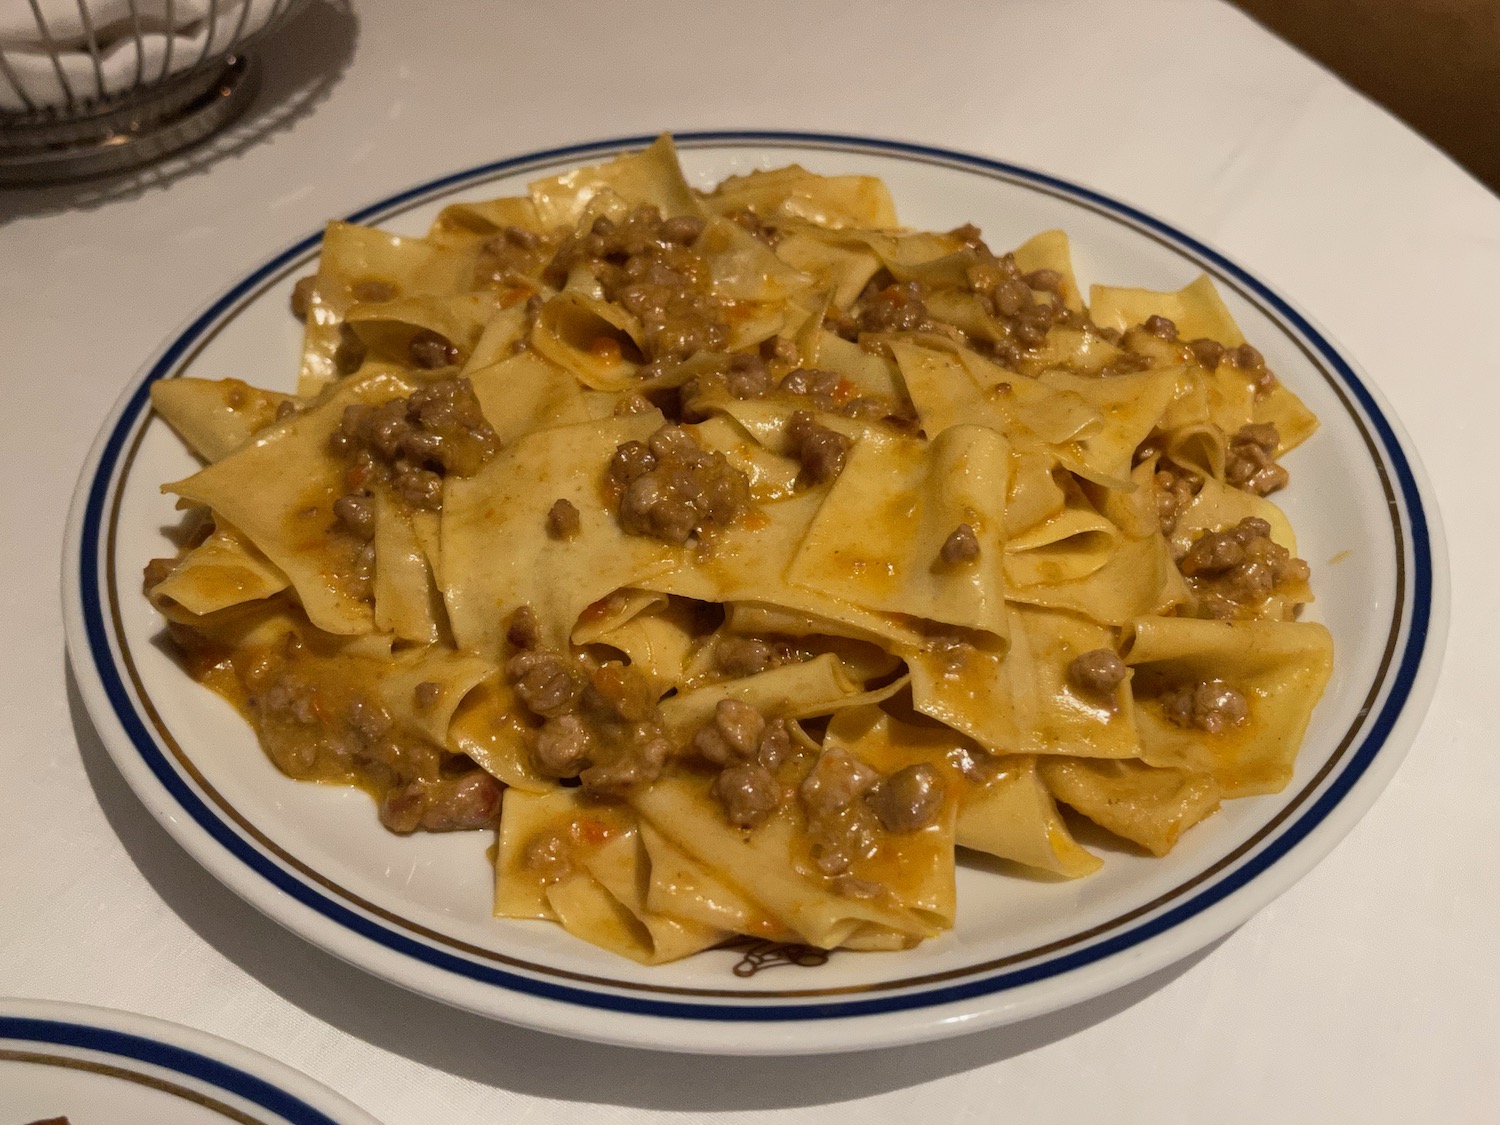 a plate of pasta with meat sauce